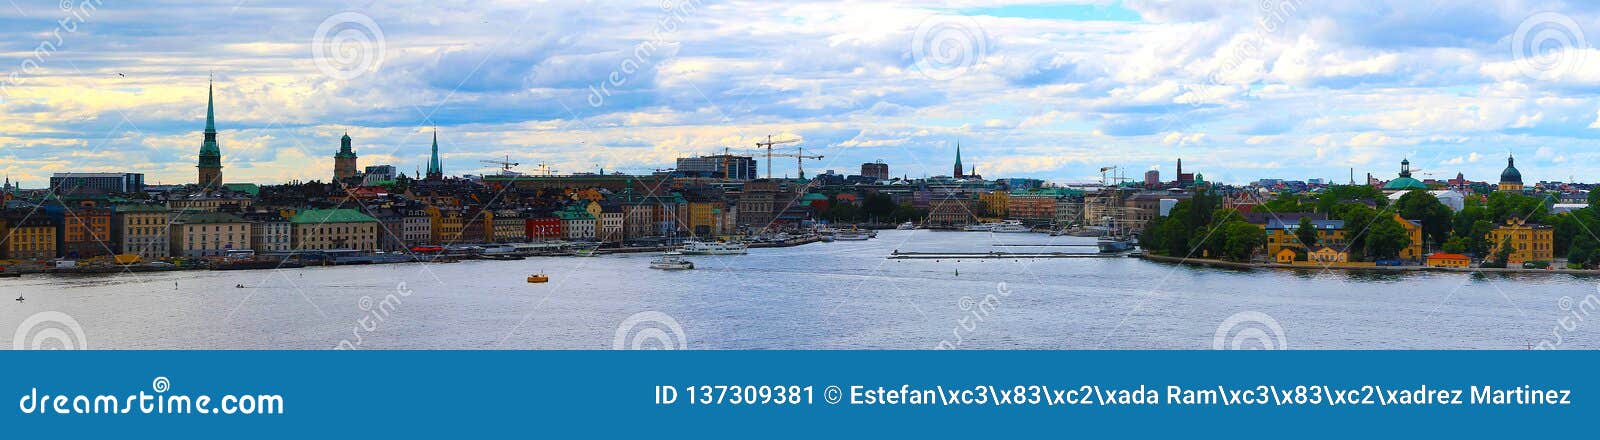 stockholm city photography in a cloudy day